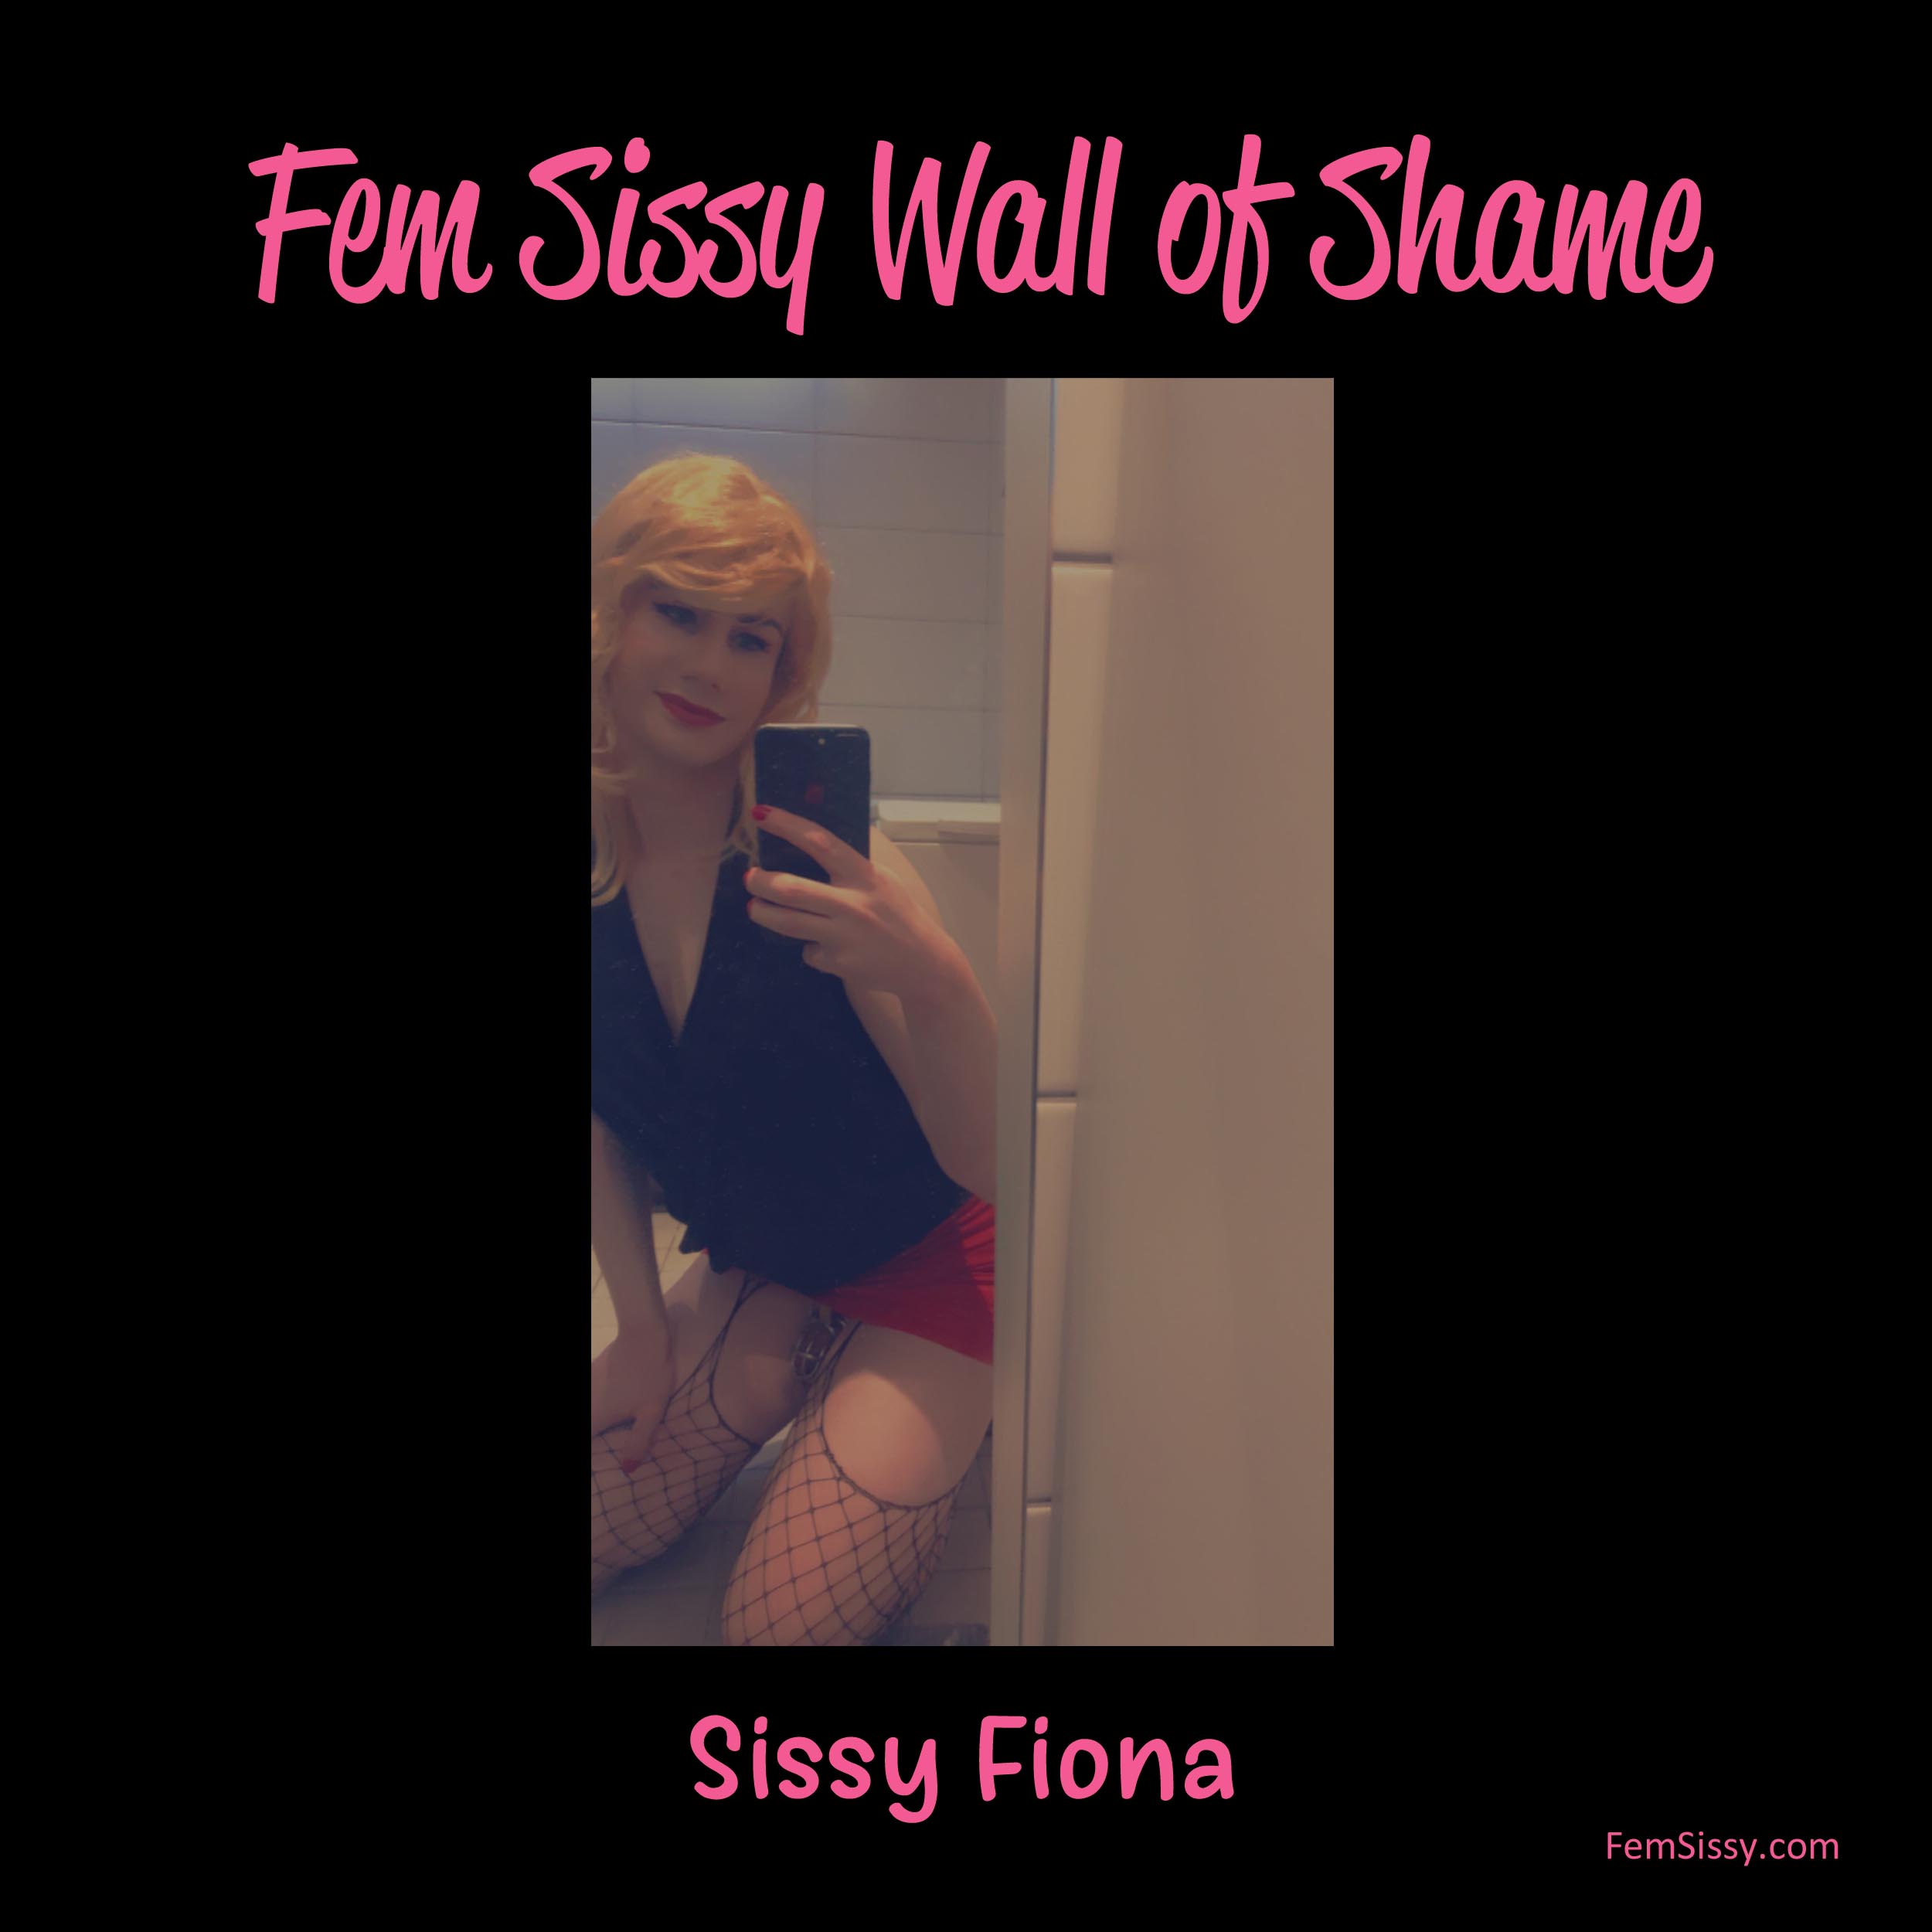 Sissy Fiona on the Wall of Shame